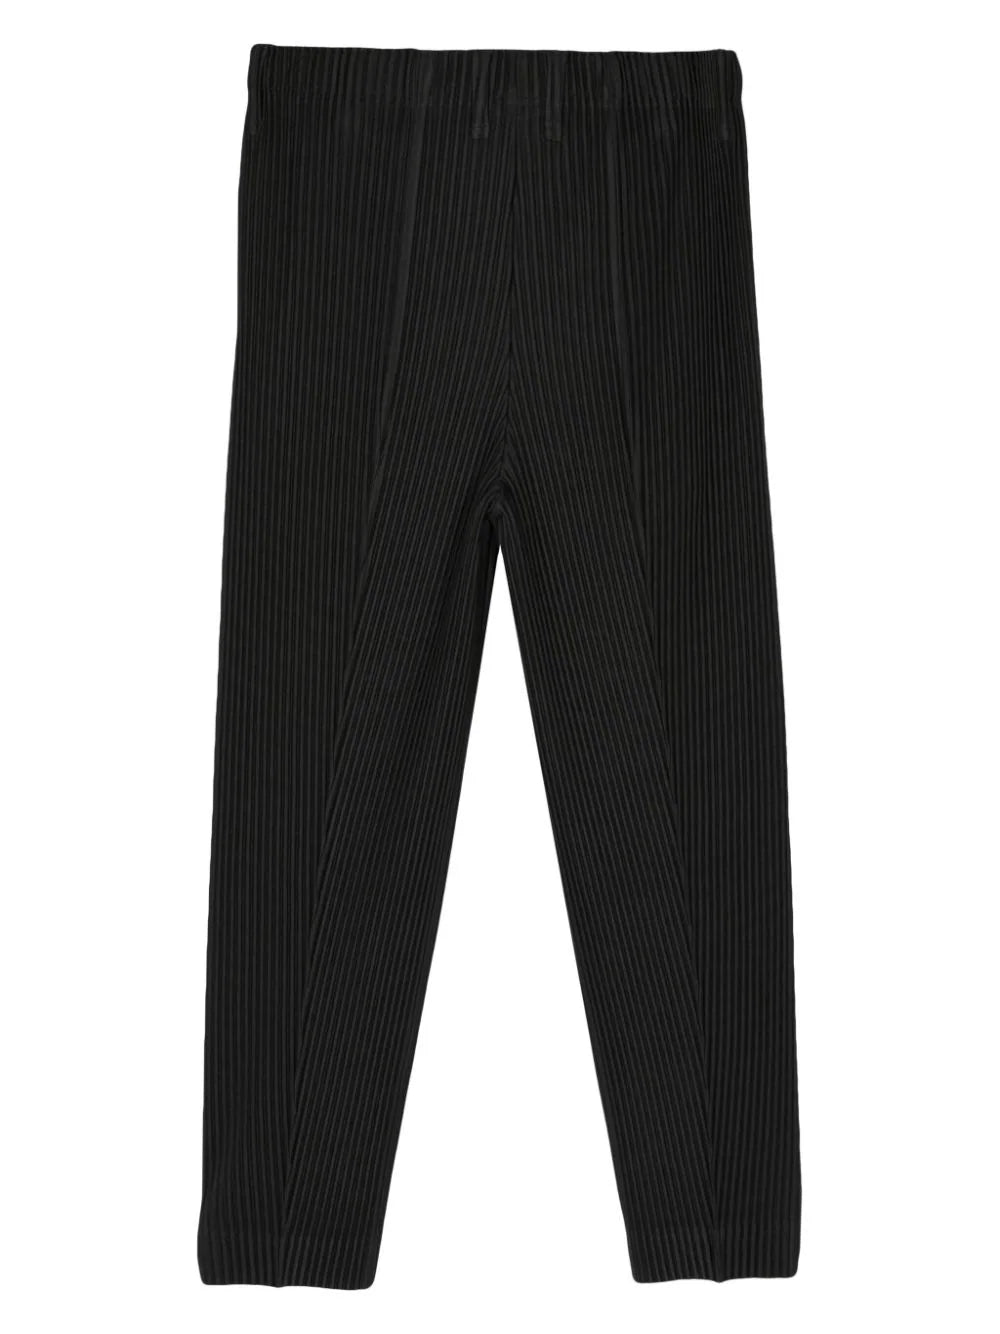 HOMME PLISSE ISSEY MIYAKE Men Compleat Trousers